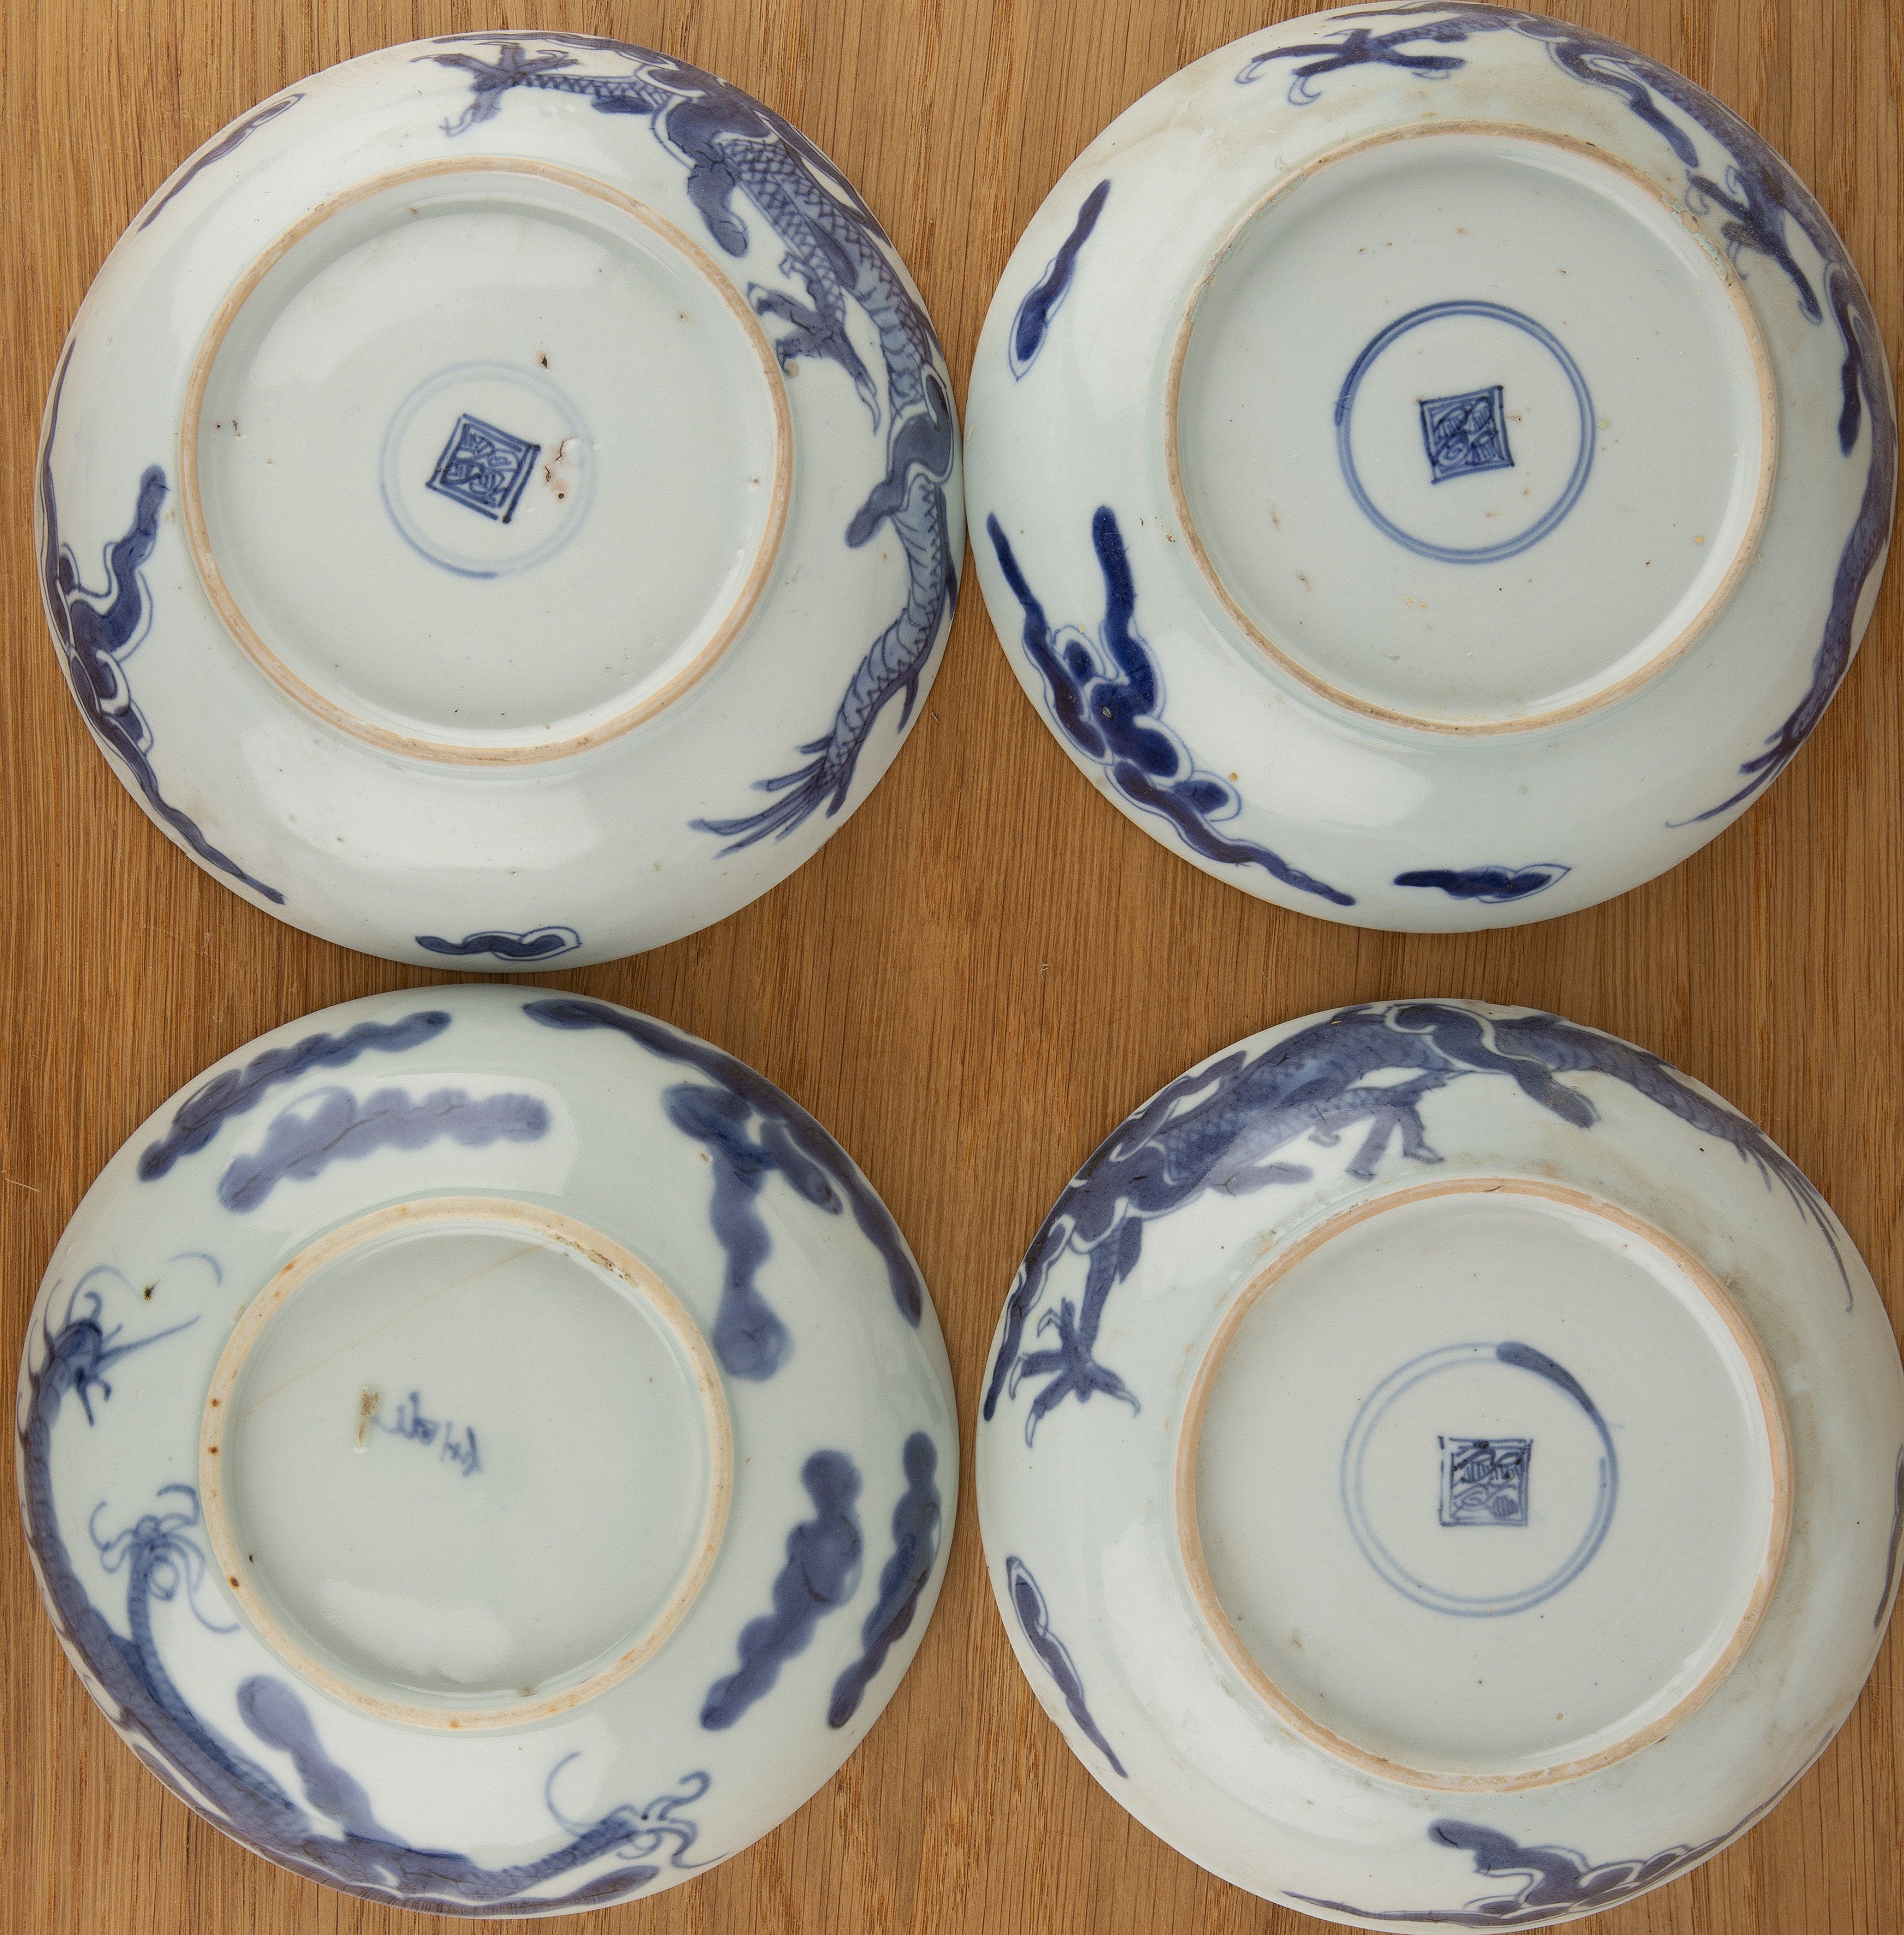 Group of blue and white porcelain Chinese and Japanese to include four shallow dragon dishes, 15.9cm - Image 3 of 5